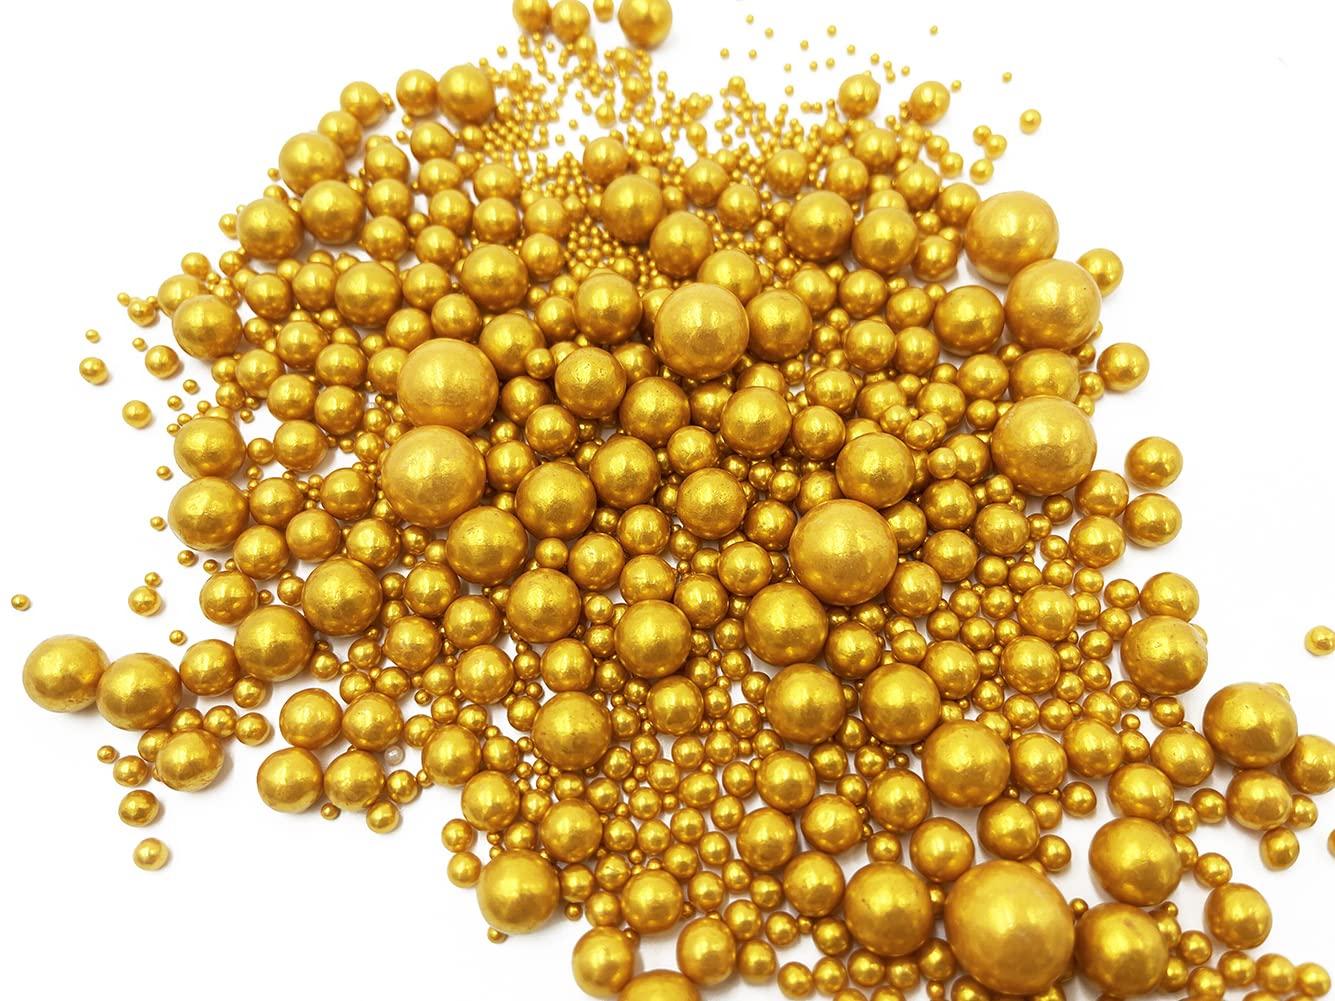 Edible Pearl Sugar Sprinkles Gold Candy 120g/ 4.2oz Baking Edible Cake  Decorations Cupcake Toppers Cookie Decorating Ice Cream Toppings  Celebrations Shaker Jar Wedding Shower Party Chirstmas Supplies (Gold)